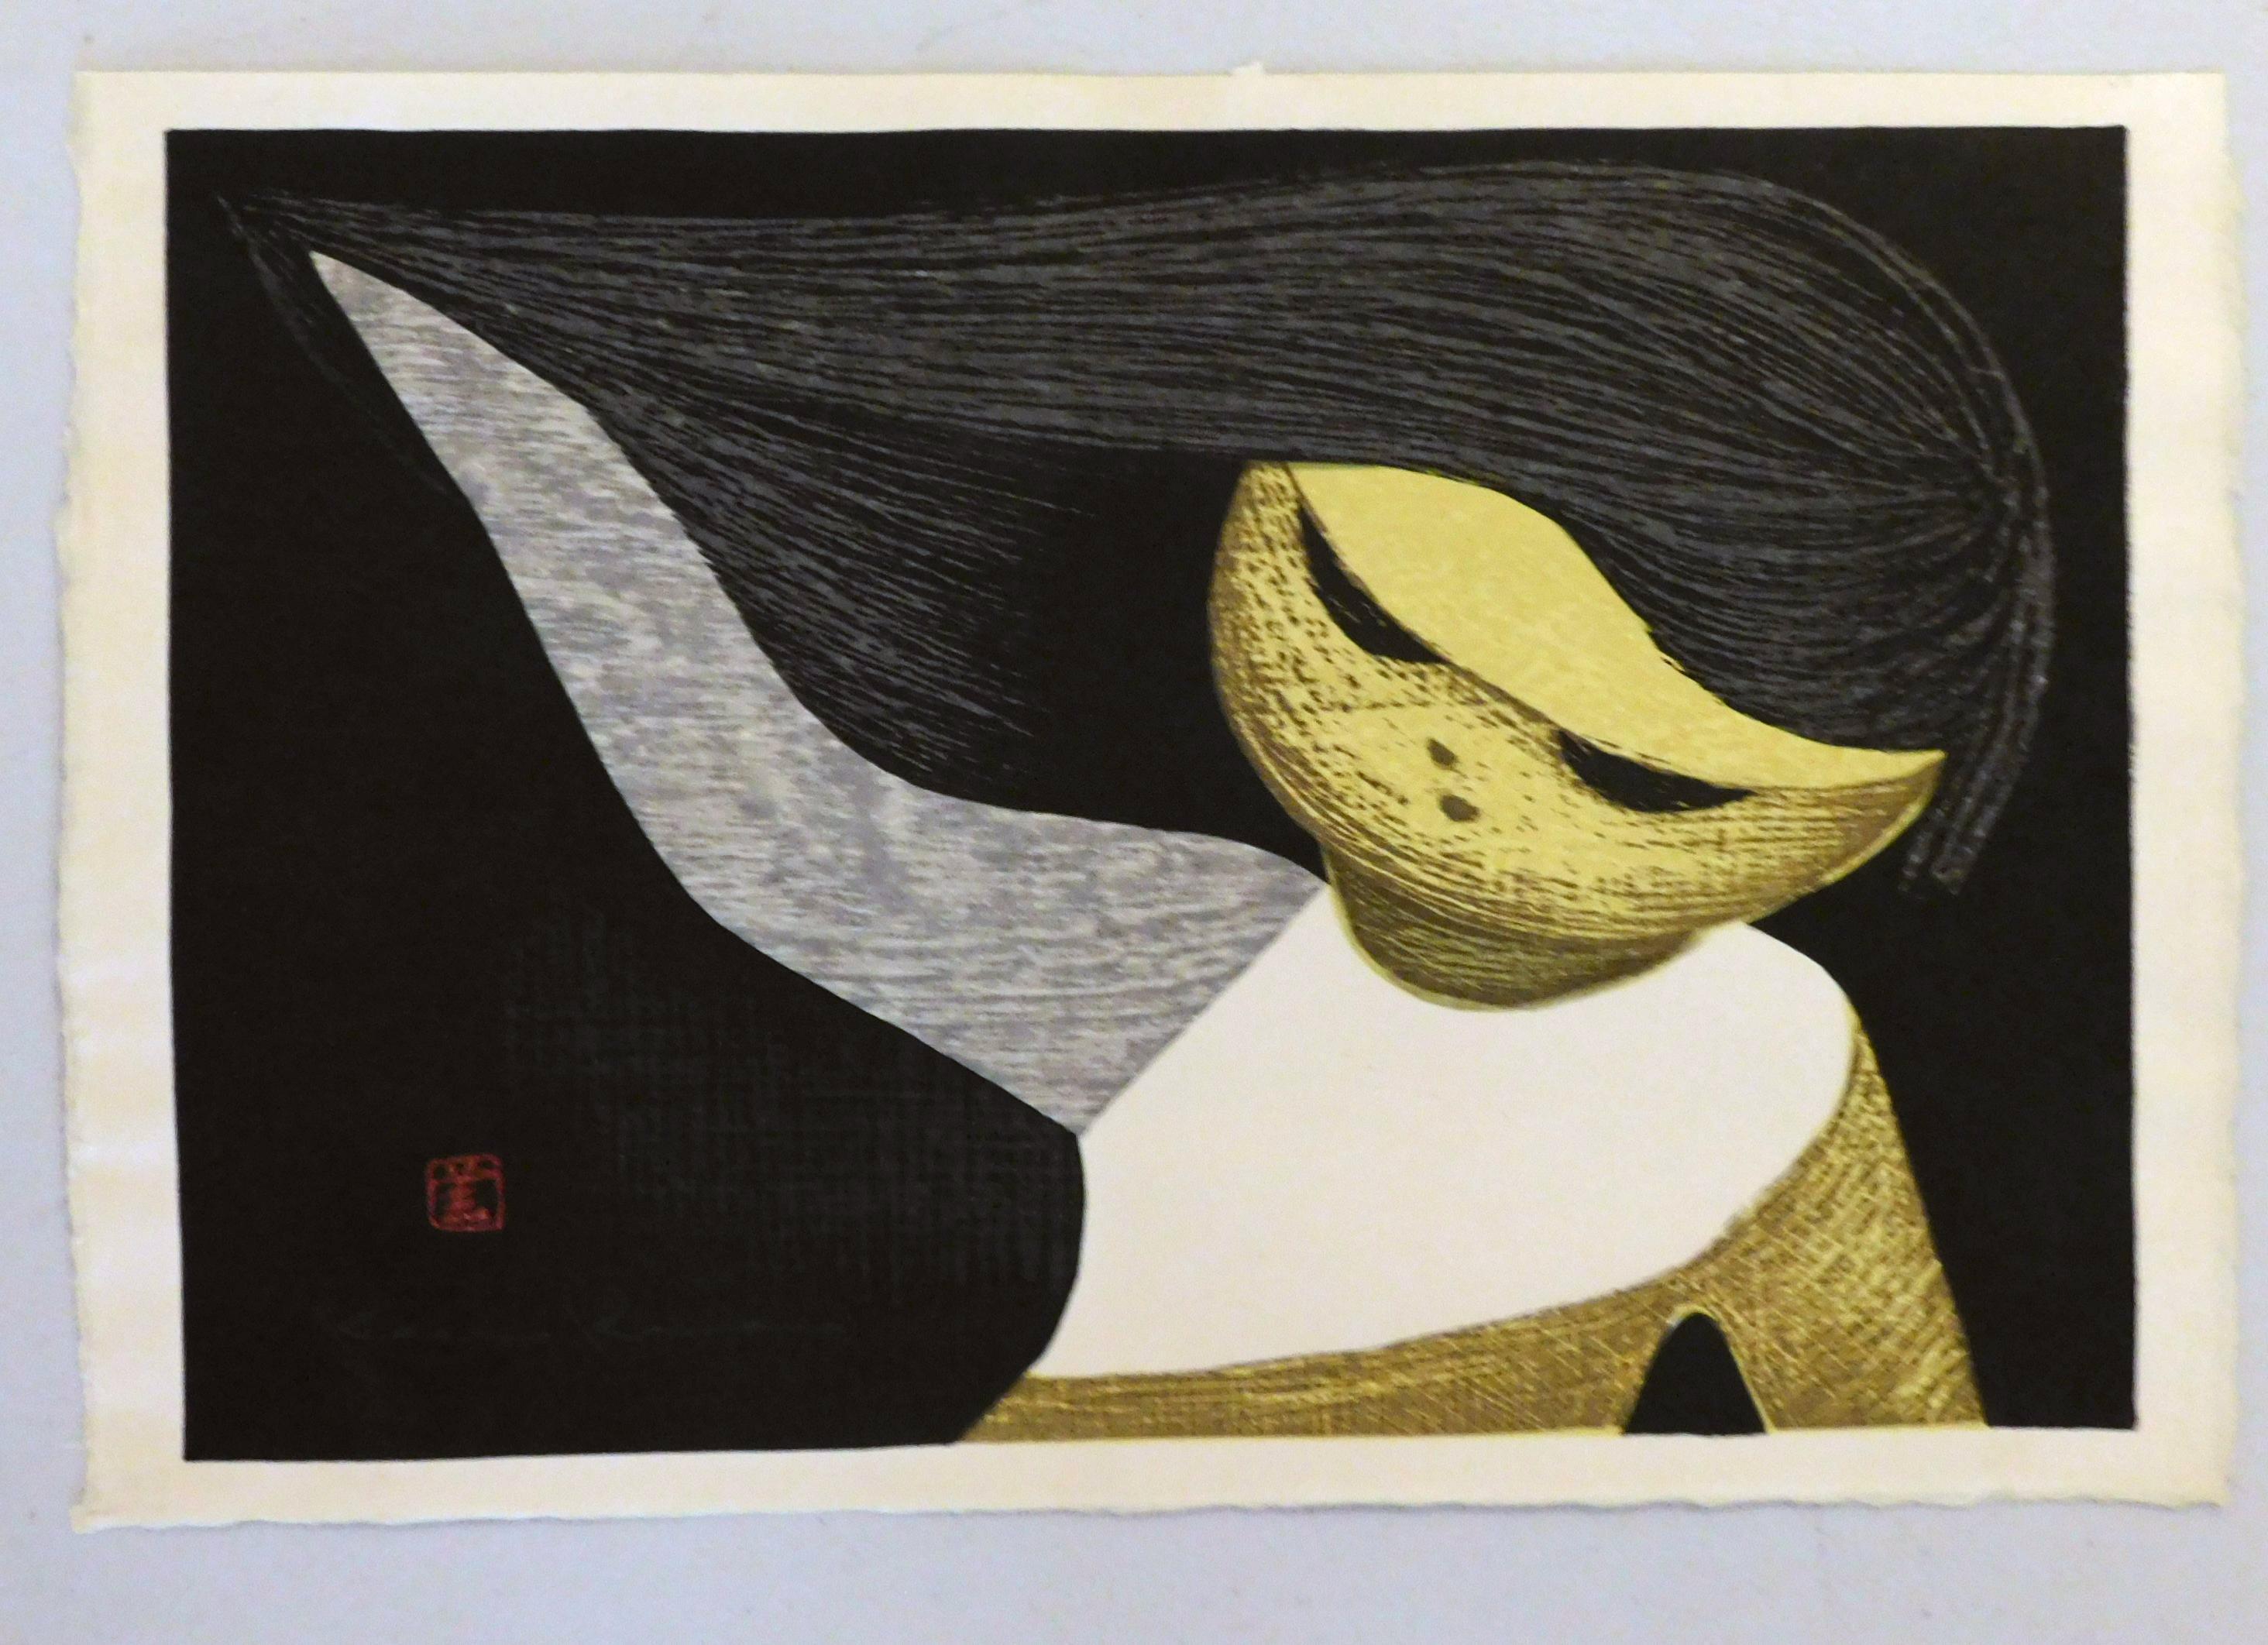 Beautifully executed color woodblock by Japanese artist Kaoru Kawano (1916- 1965).
This work titled “Gentle Breeze” depicts a young girl with blowing hair. 
It is pencil signed in the image lower left and bears the artist’s chop mark. 
The image